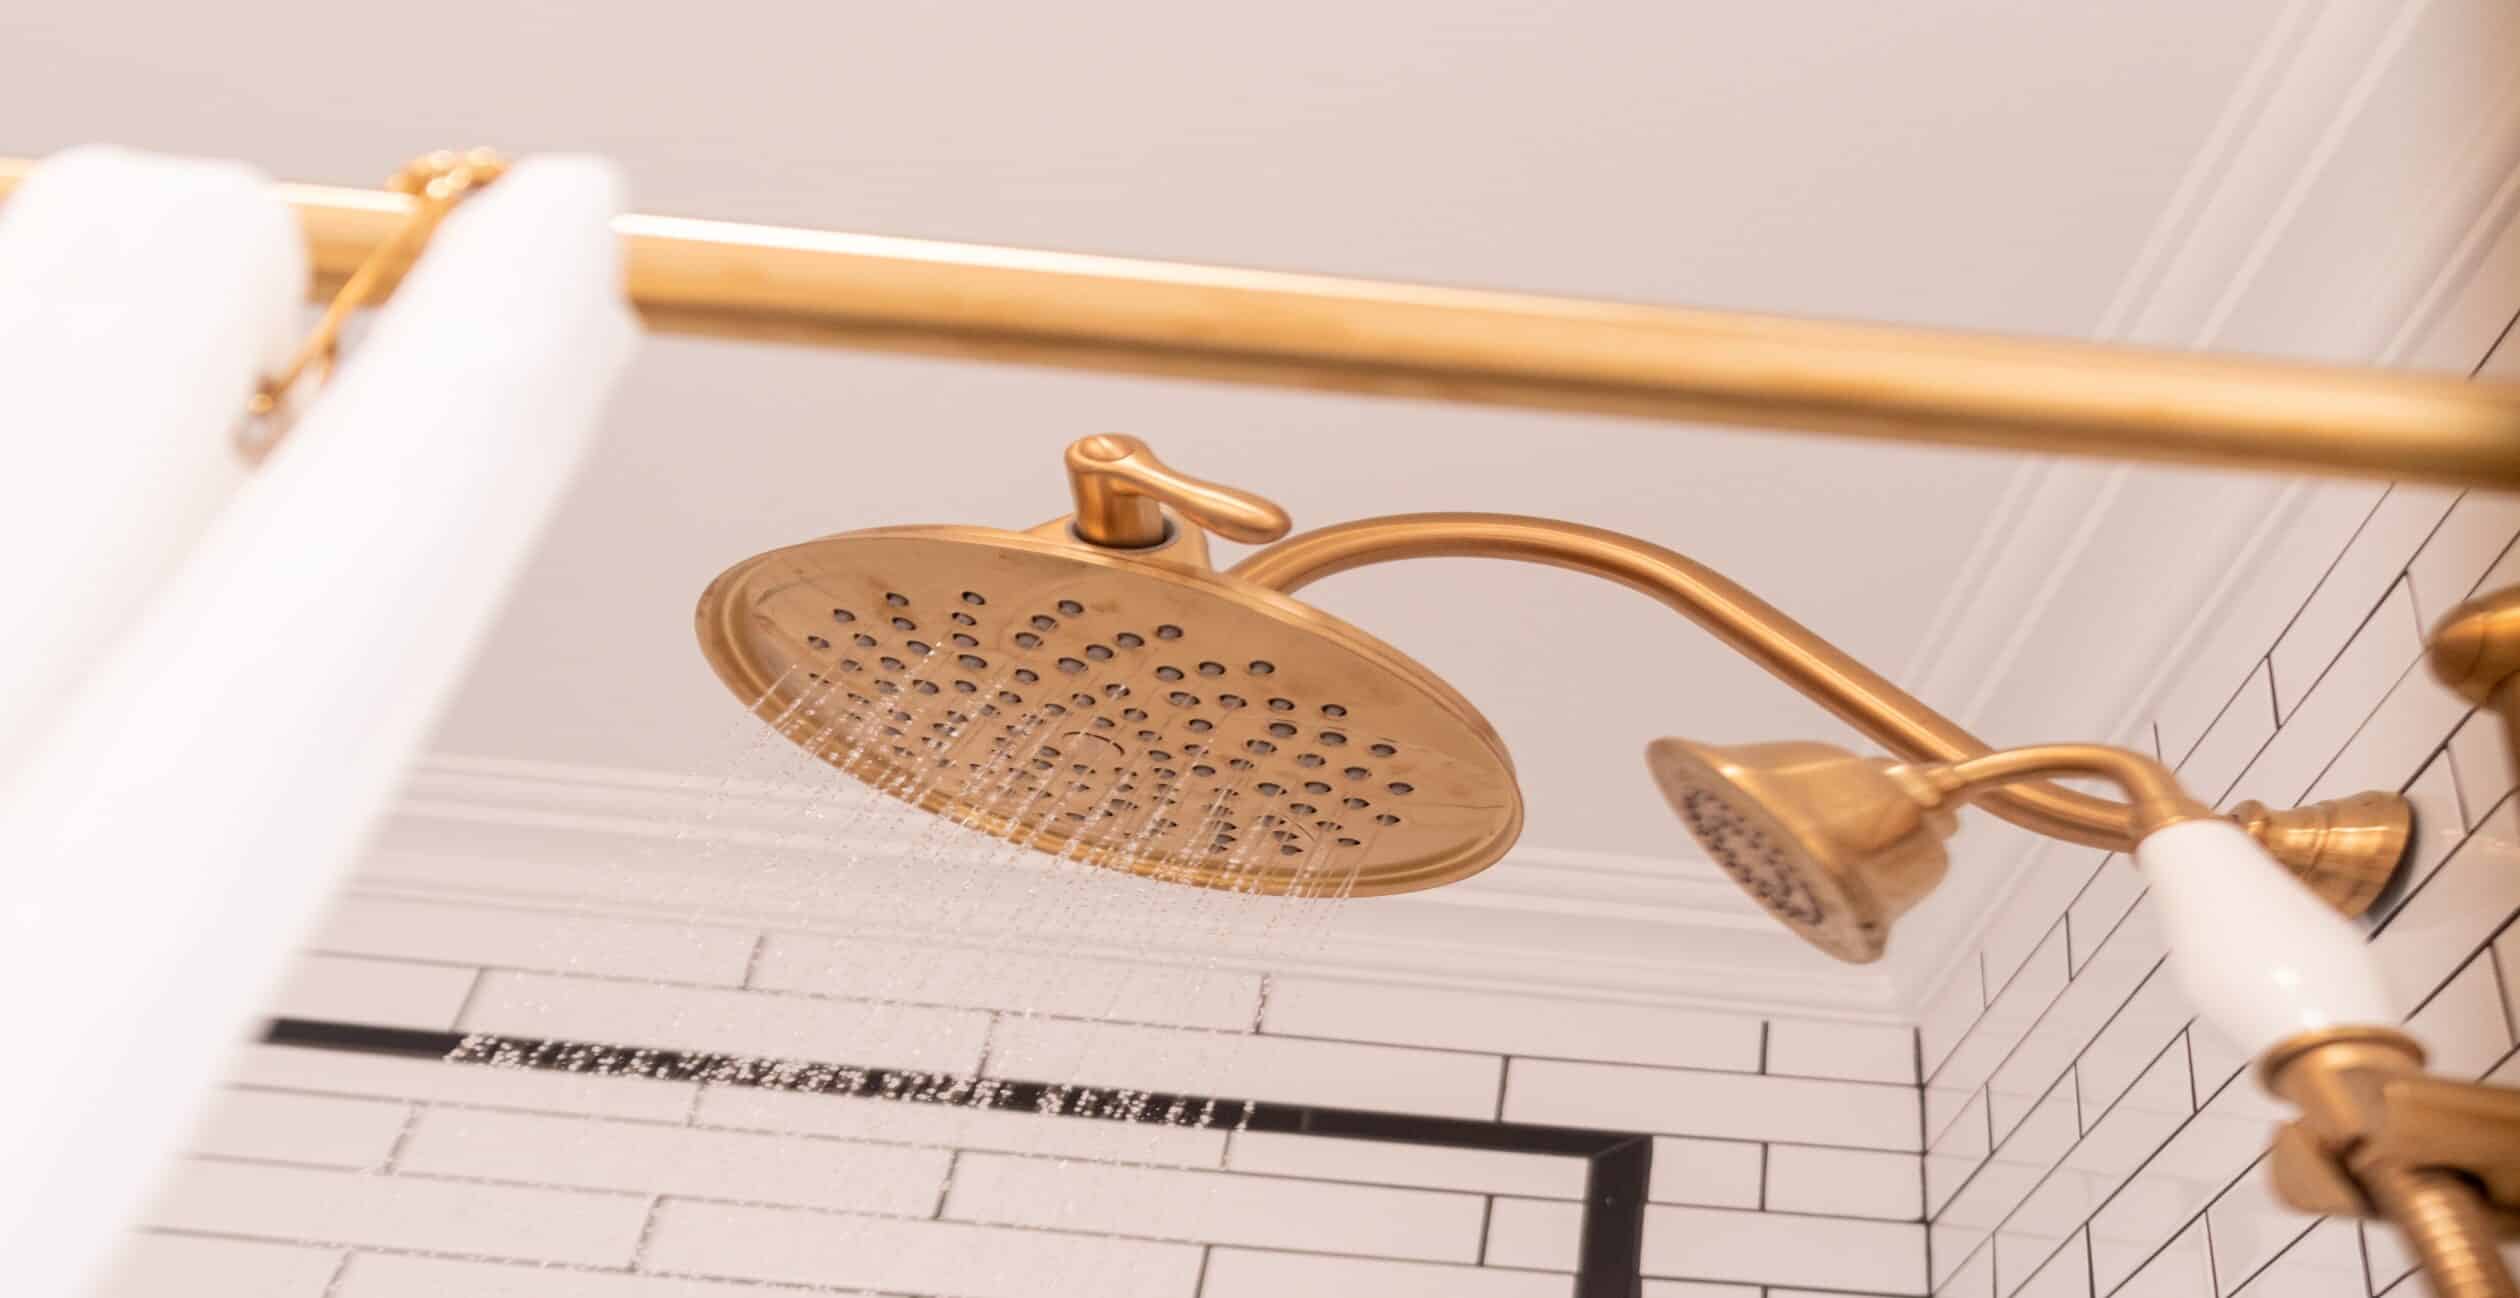 Gold shower fixtures with white subway tiles